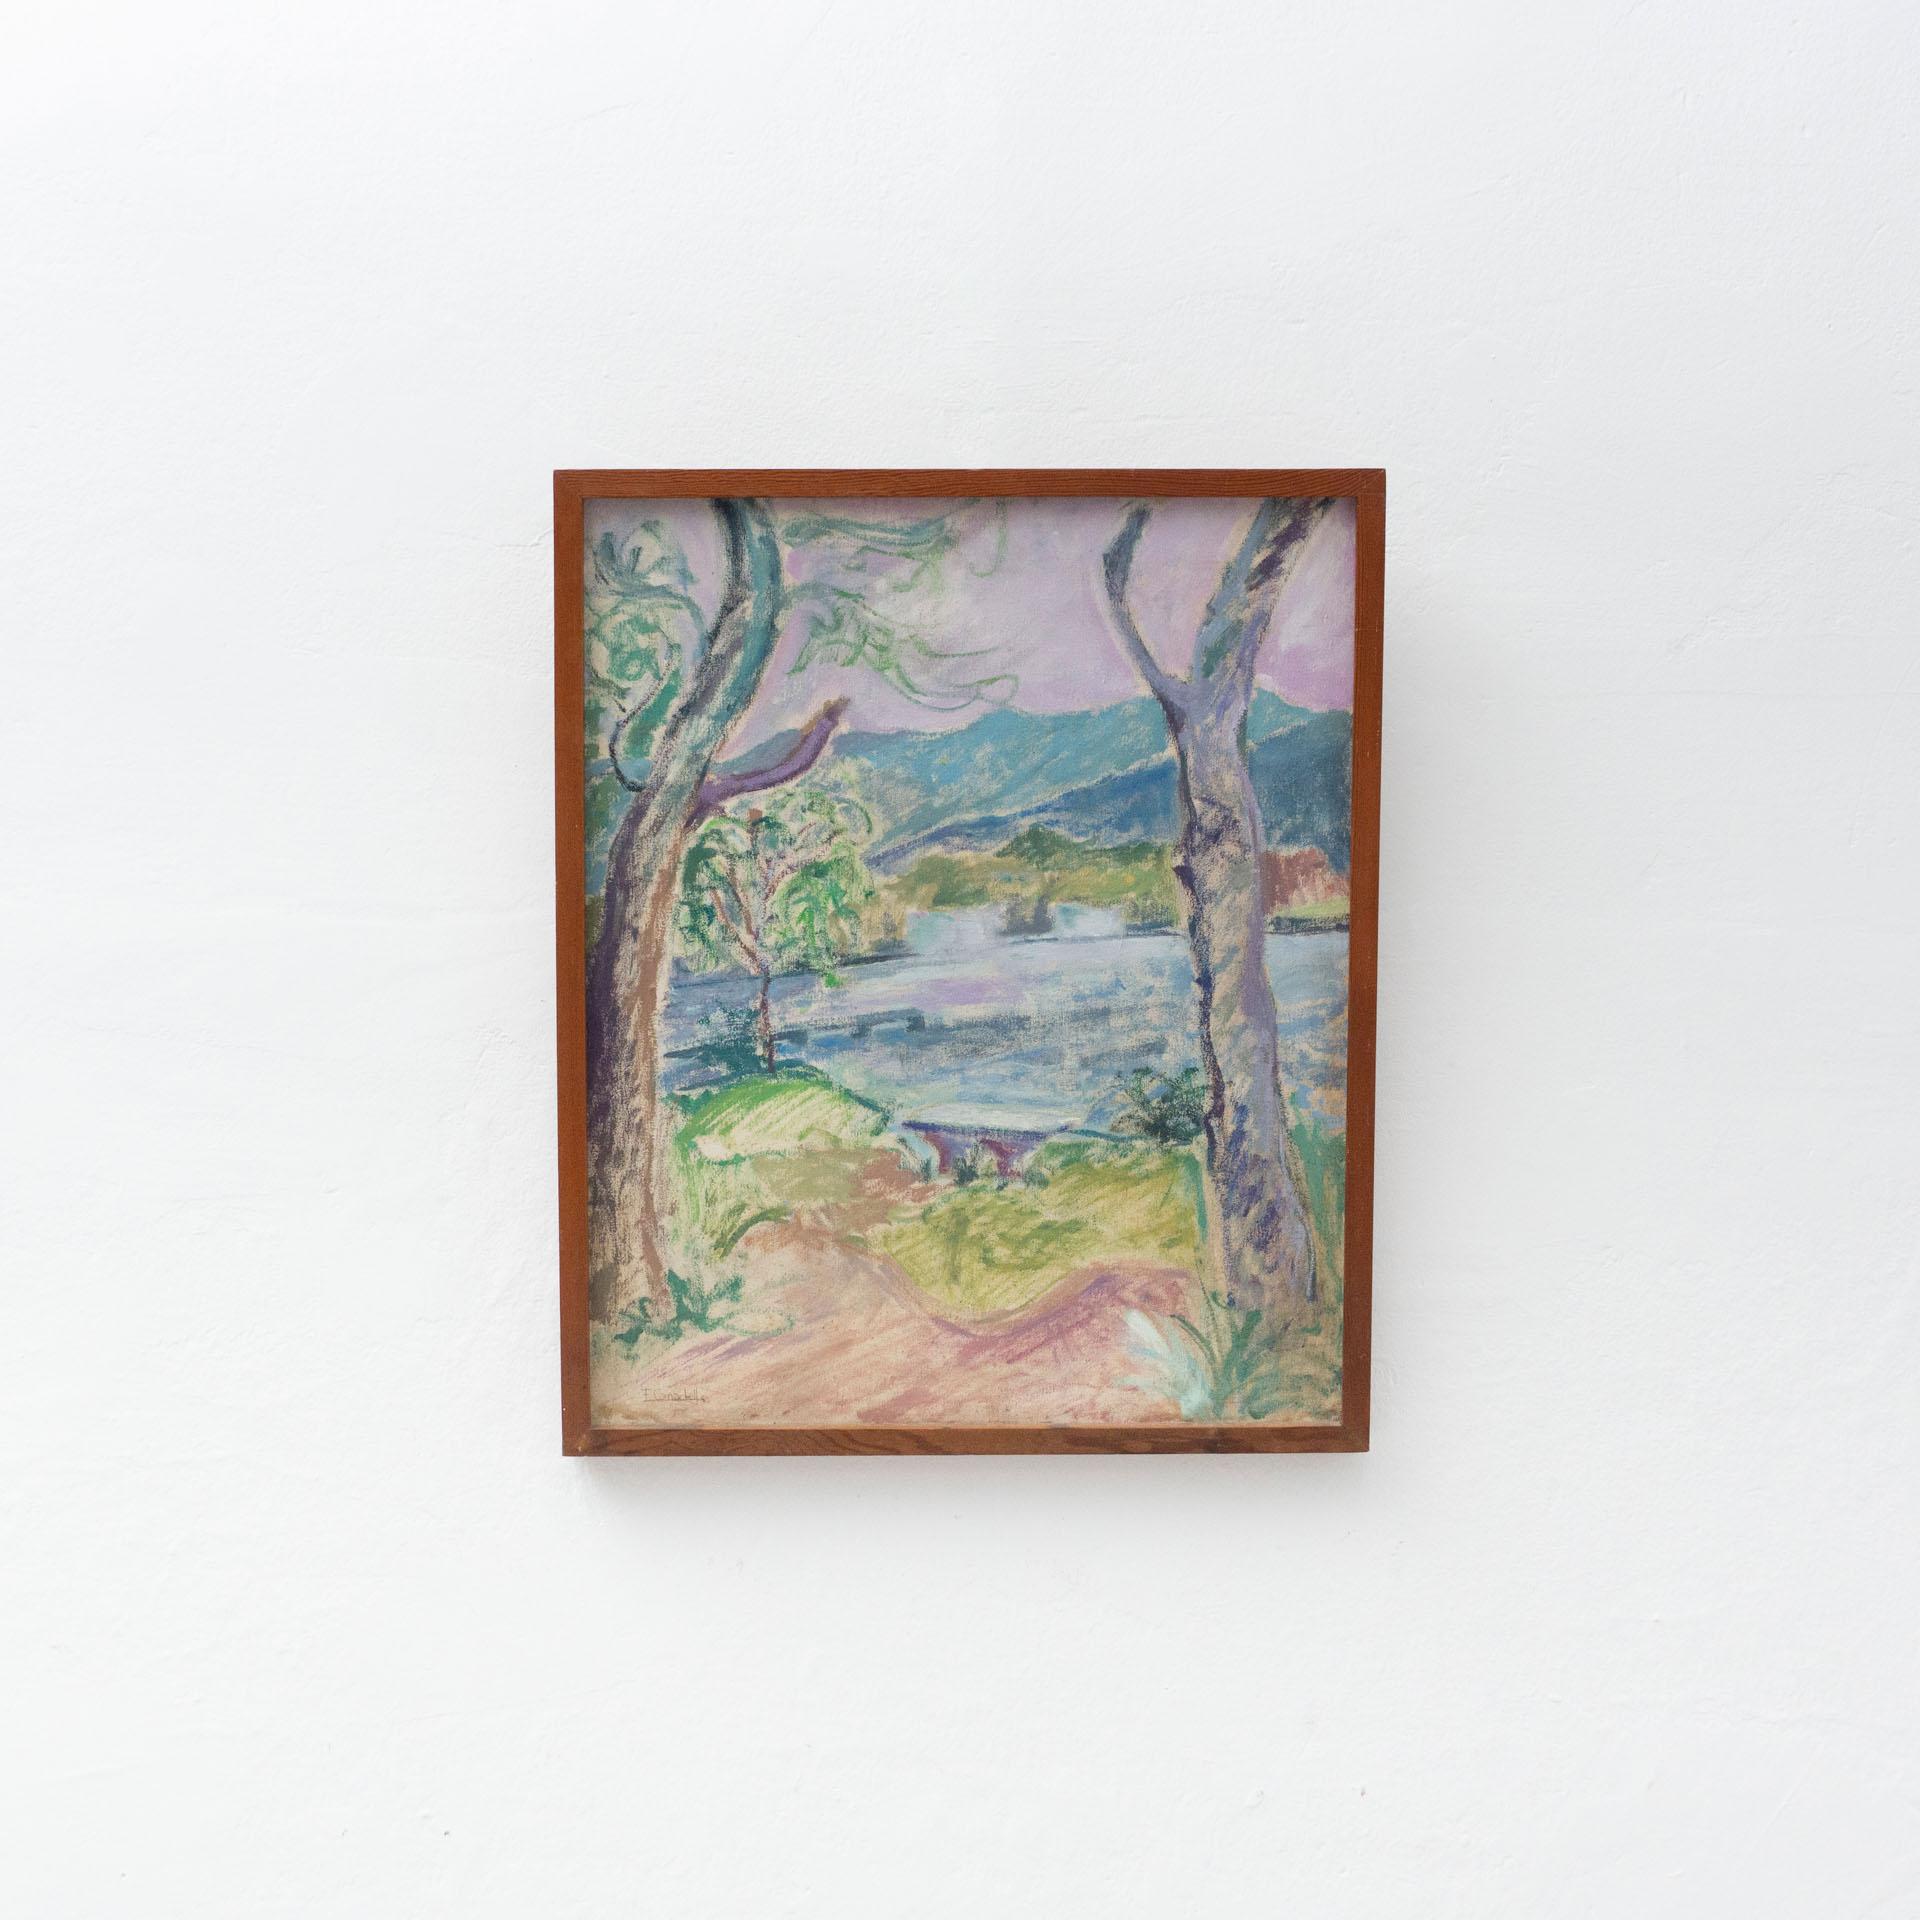 Fauvist style landscape painting.
By F.Canadell from Spain, circa 1970.

In original condition, with minor wear consistent with age and use, preserving a beautiful patina.

Material:
Oil on canvas

Dimensions:
D 4 cm x W 64 cm x H 76 cm.